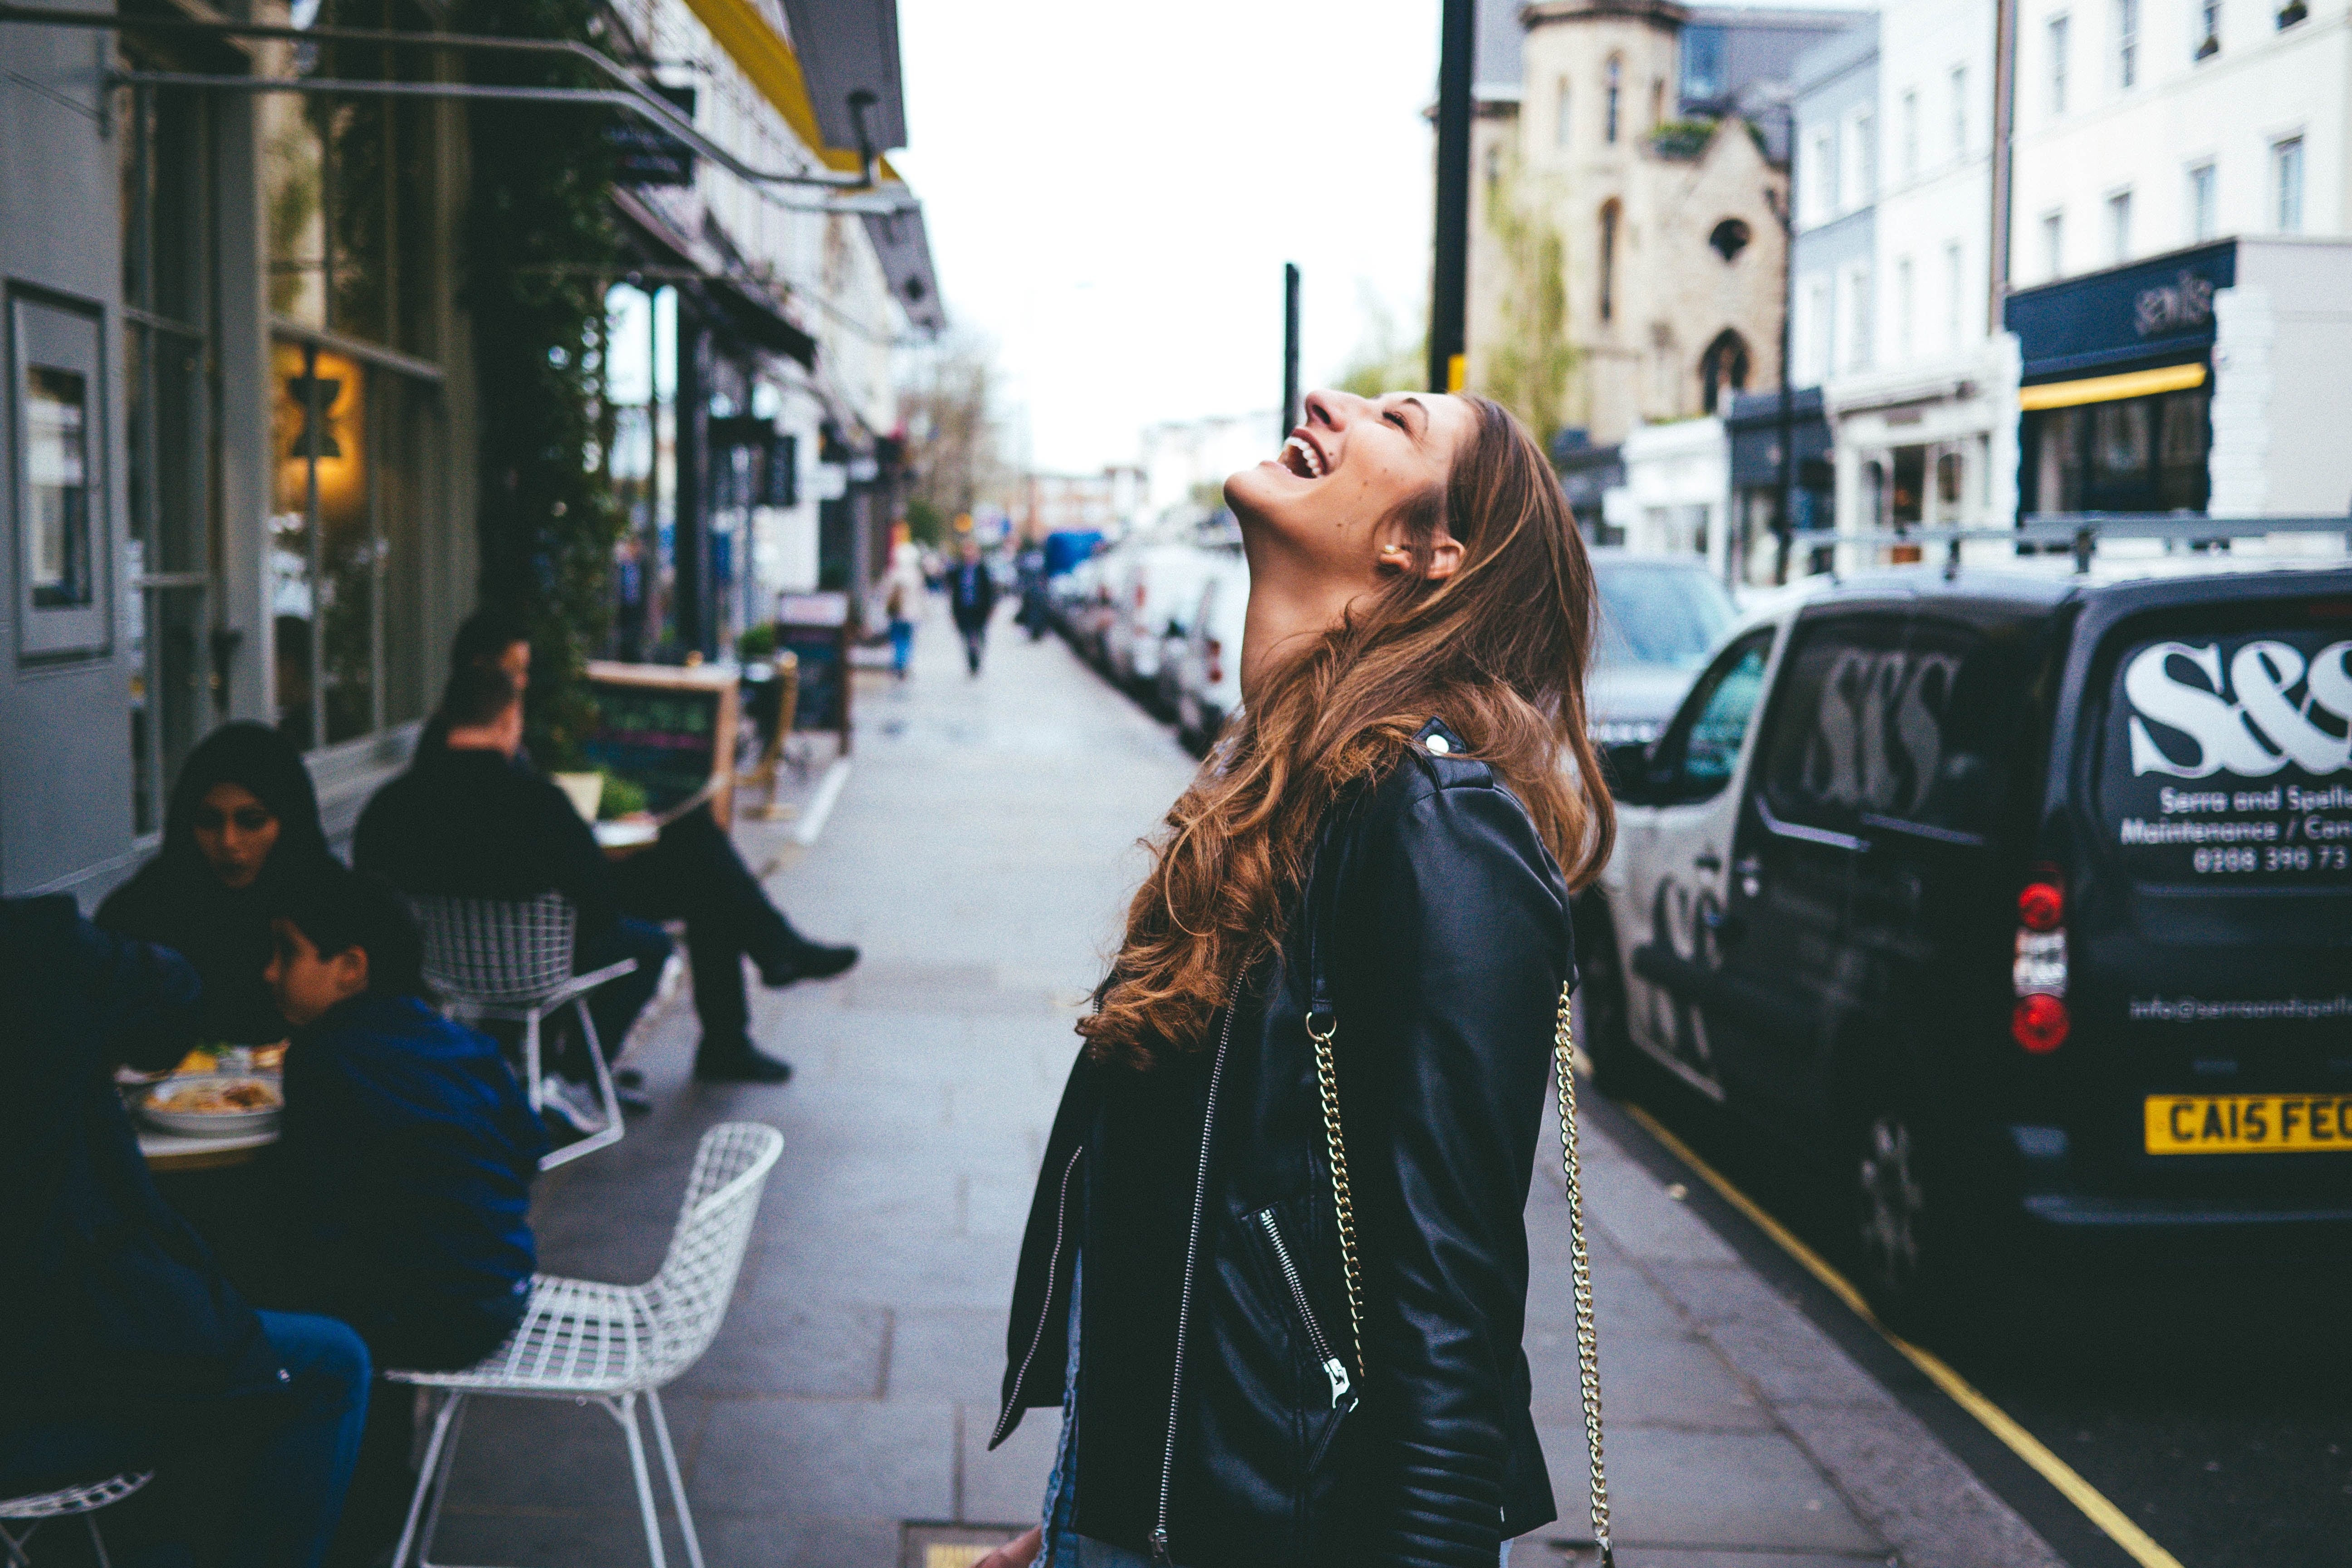 A woman closing her eyes and looking up laughs on the sidewalk outside a cafe.